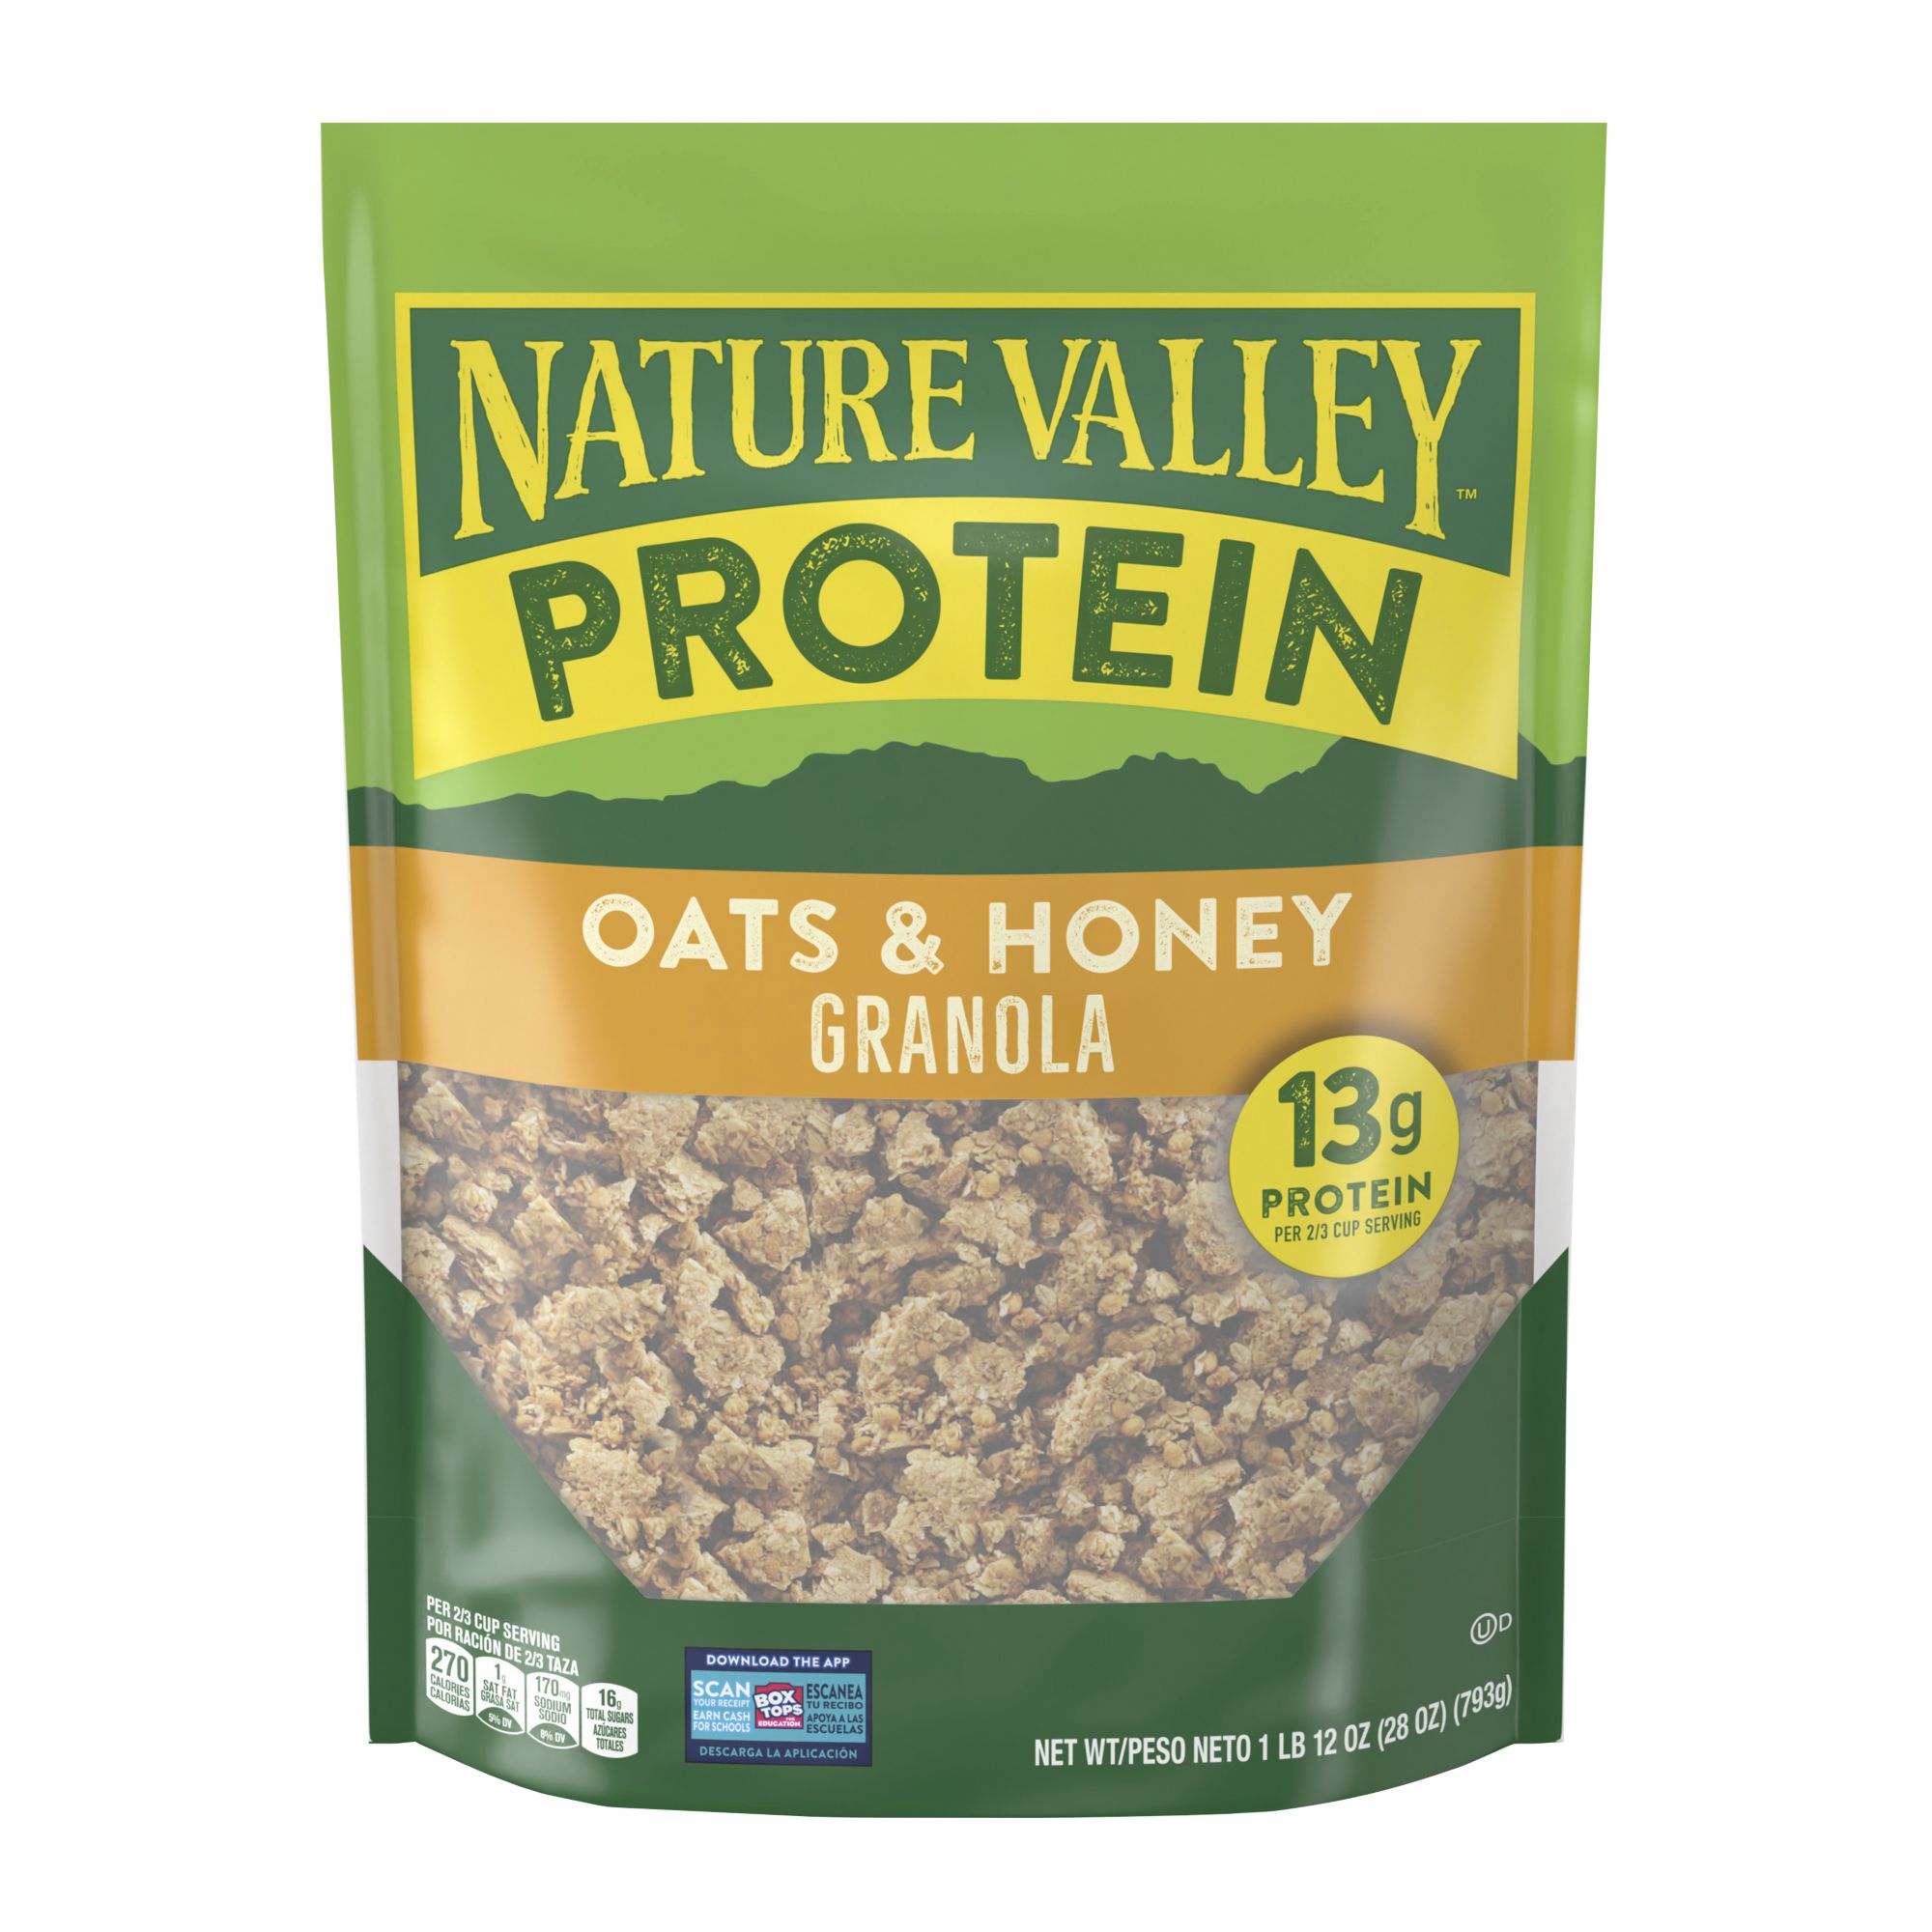 Nature Valley Protein Oats and Honey Granola, 28 oz.